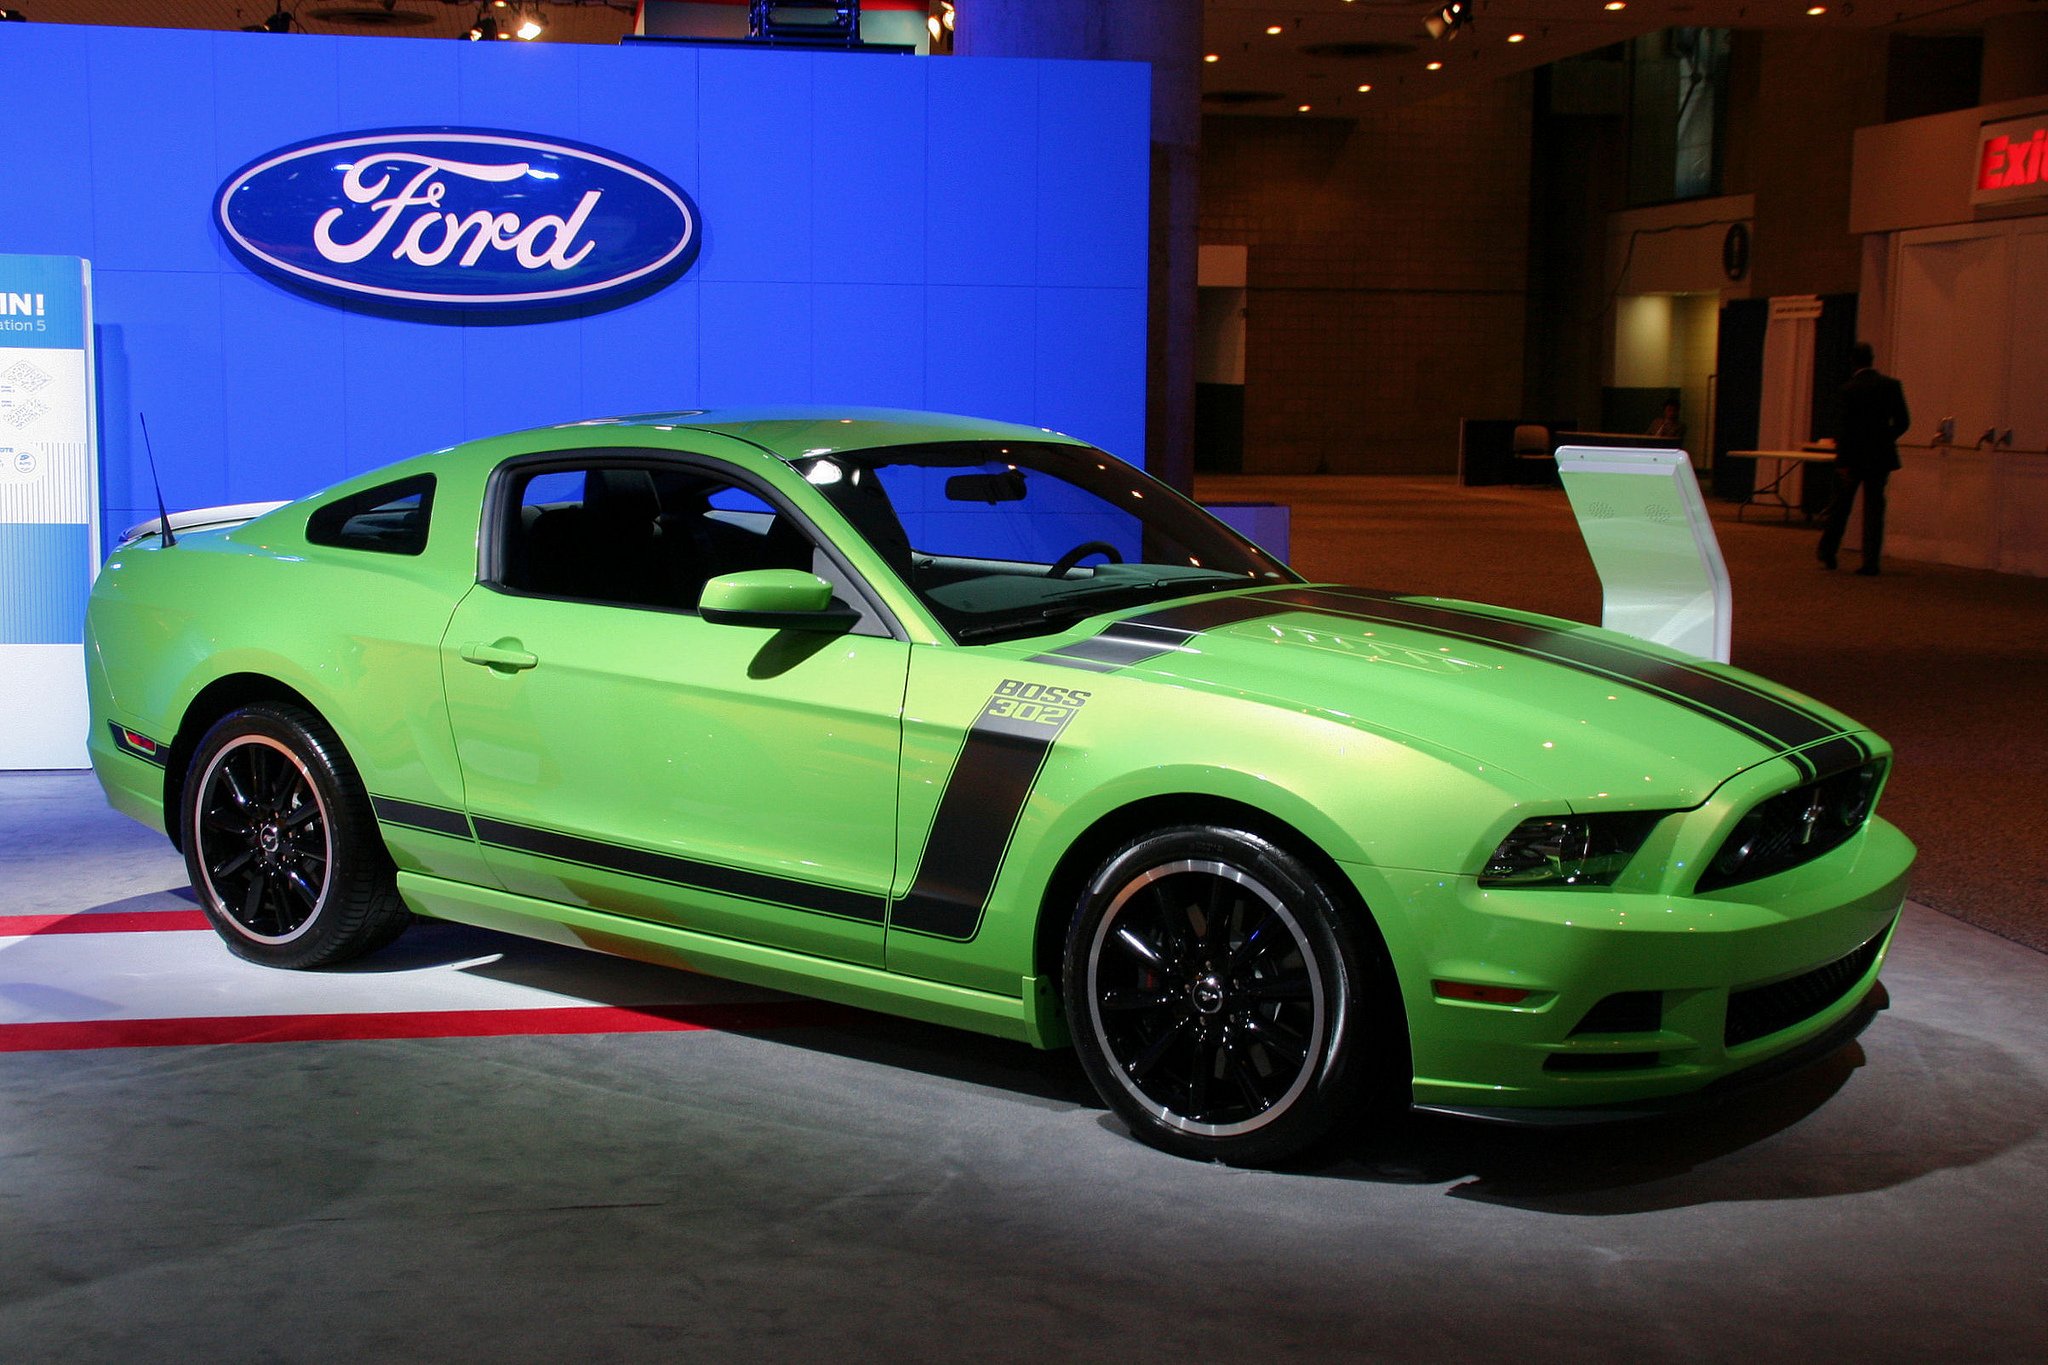 2012, 2013, 3, 02boss, Ford, Muscle, Mustang, Pony, Cars, Usa Wallpaper